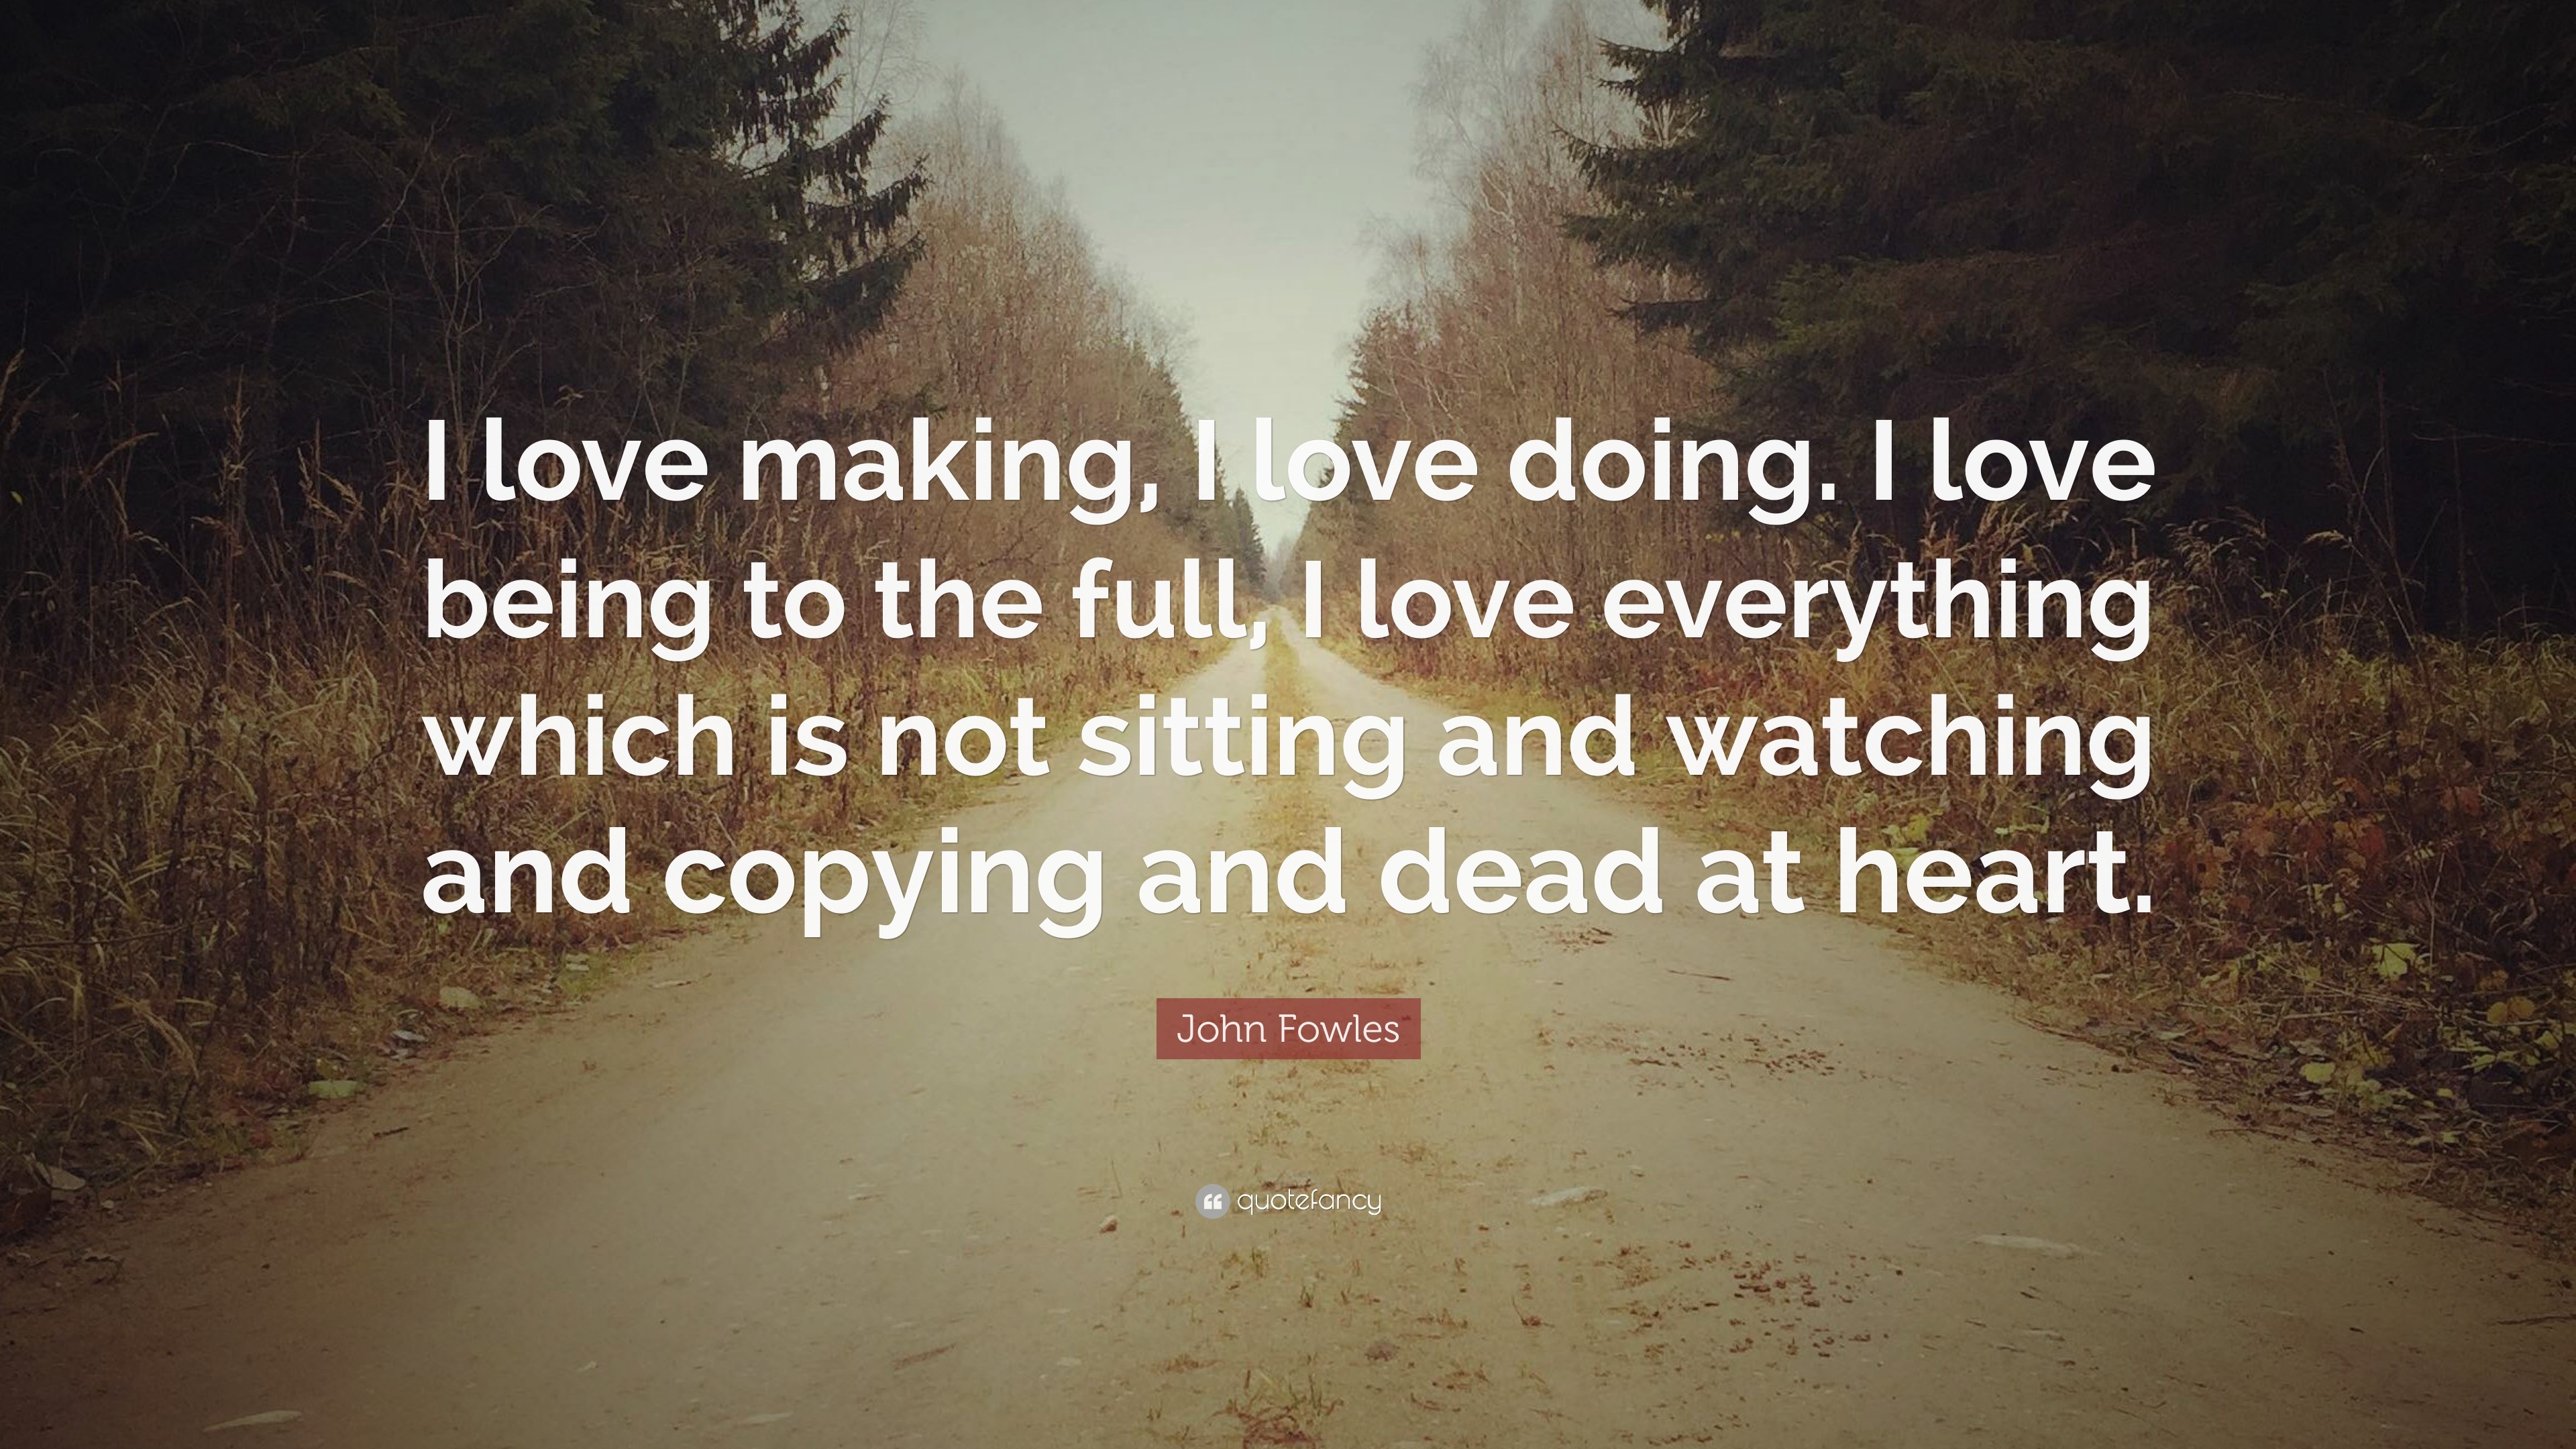 John Fowles Quote “I love making I love doing I love being